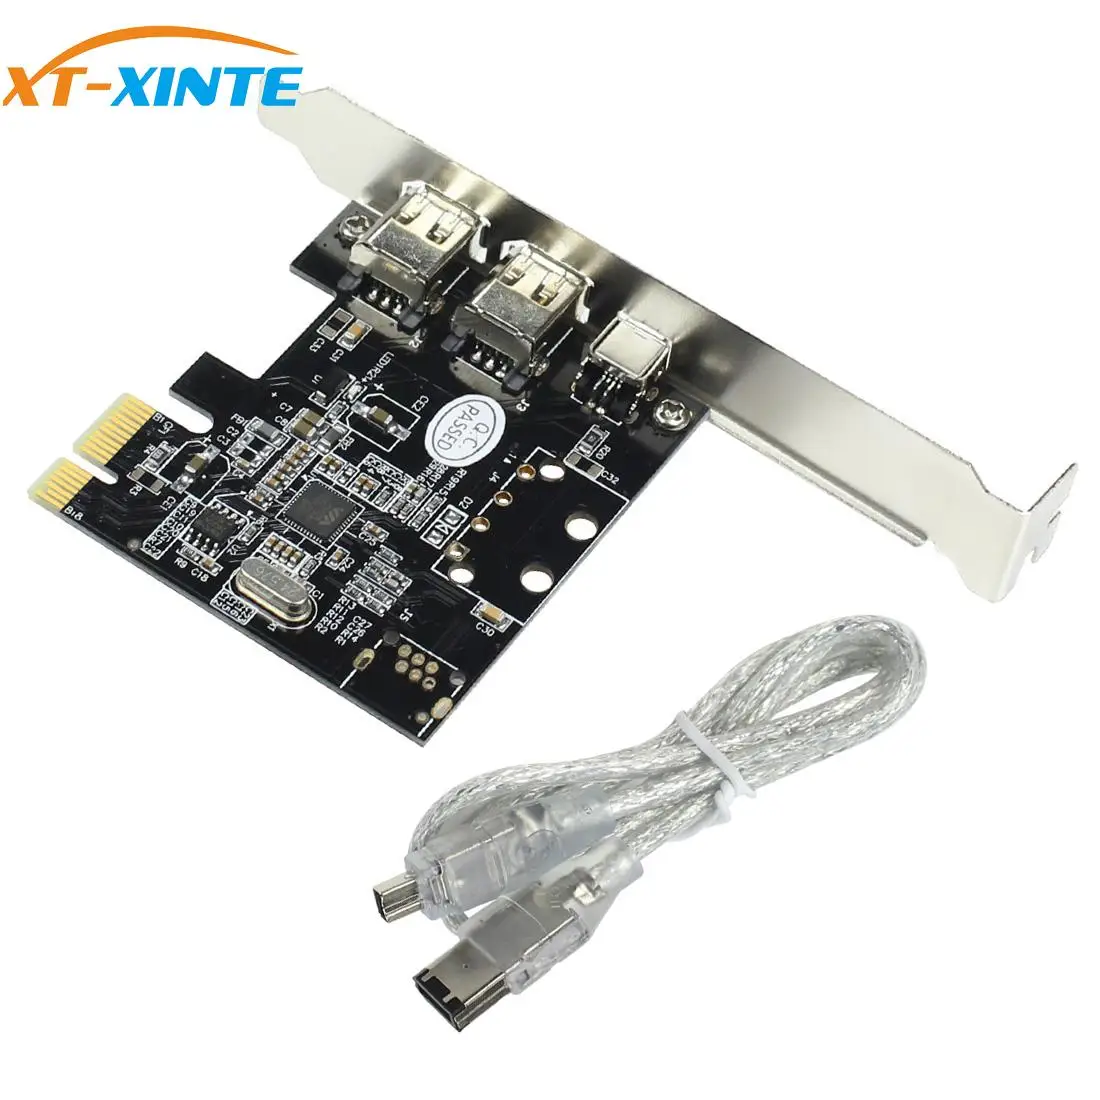 

XT-XINTE Expansion Card PCIe 3 Ports 1394A Firewire PCI Express to IEEE 1394 Adapter Controller 2 x 6 Pin And 1 x 4 Pin